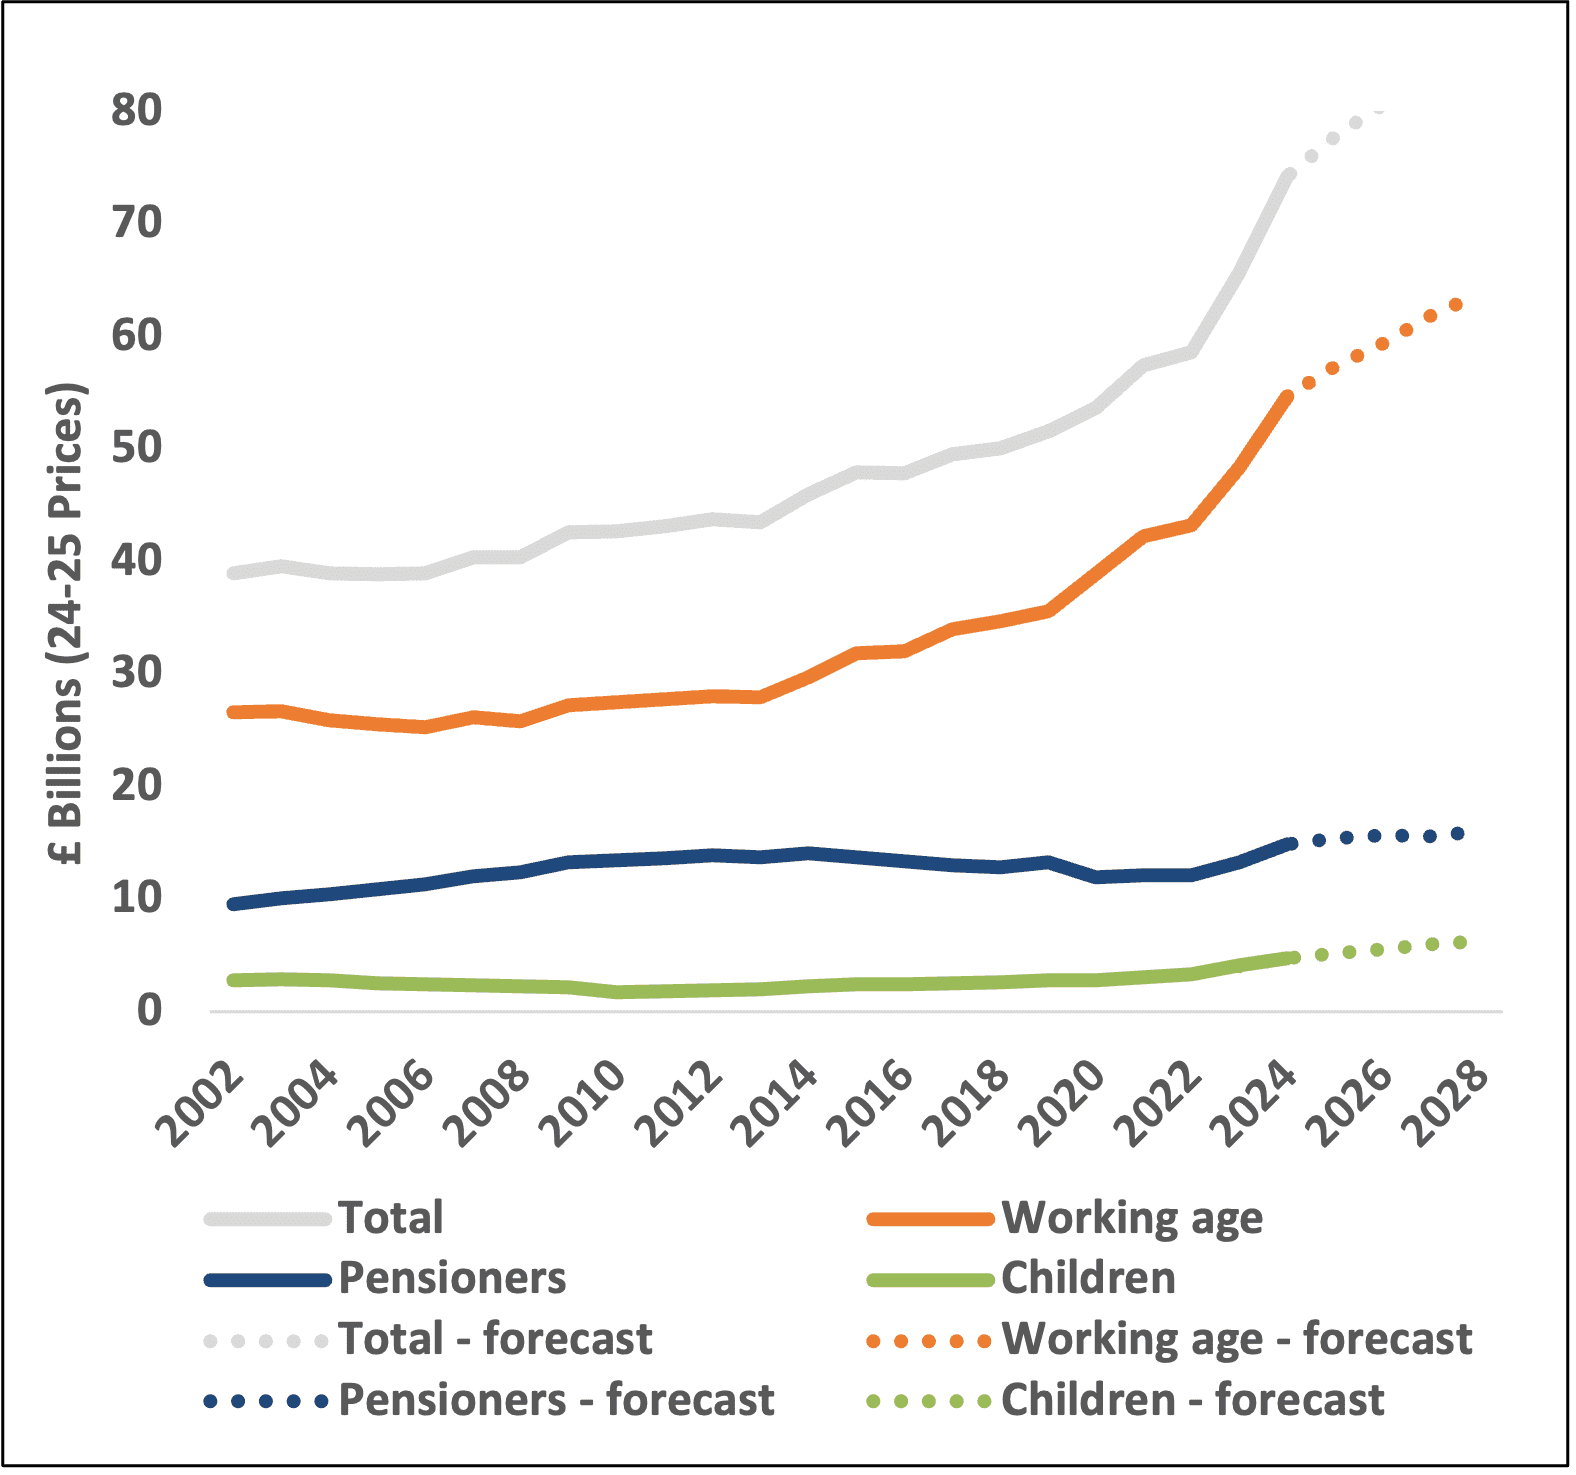 Graph showing the Actual and Forecast expenditure on disability and incapacity benefit across different age groups, like working age, pensioners and children.